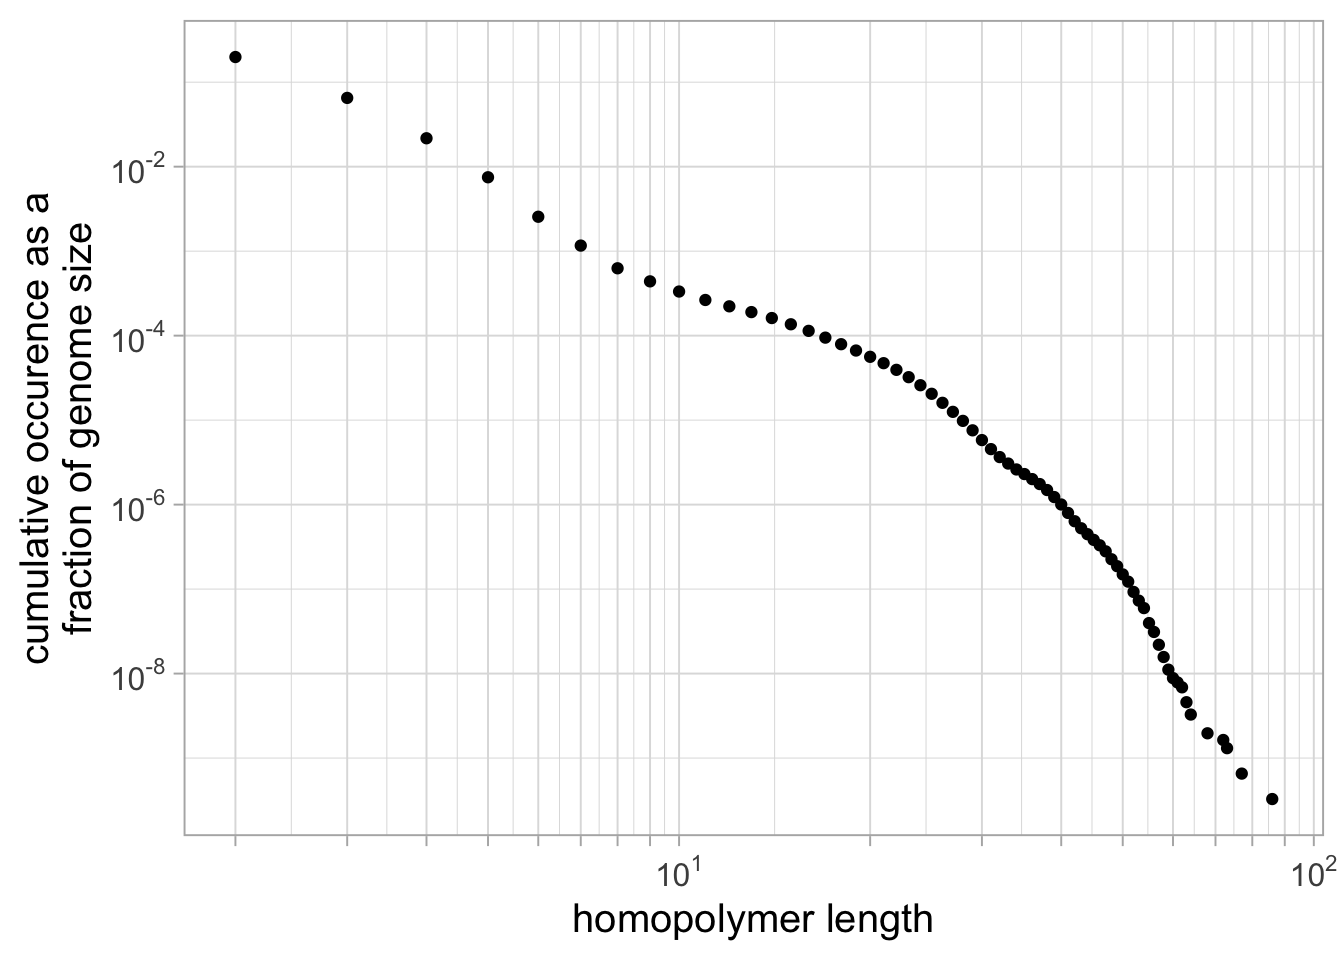 **Homopolymer fraction of the whole human genome by homopolymer length.**  
The homopolymer counts were calculated from the T2T consortium full human genome assembly CHM13 v1.1. This figure was inspired by Figure 3b of reference [@booeshaghiPseudoalignmentFacilitatesAssignment2022].